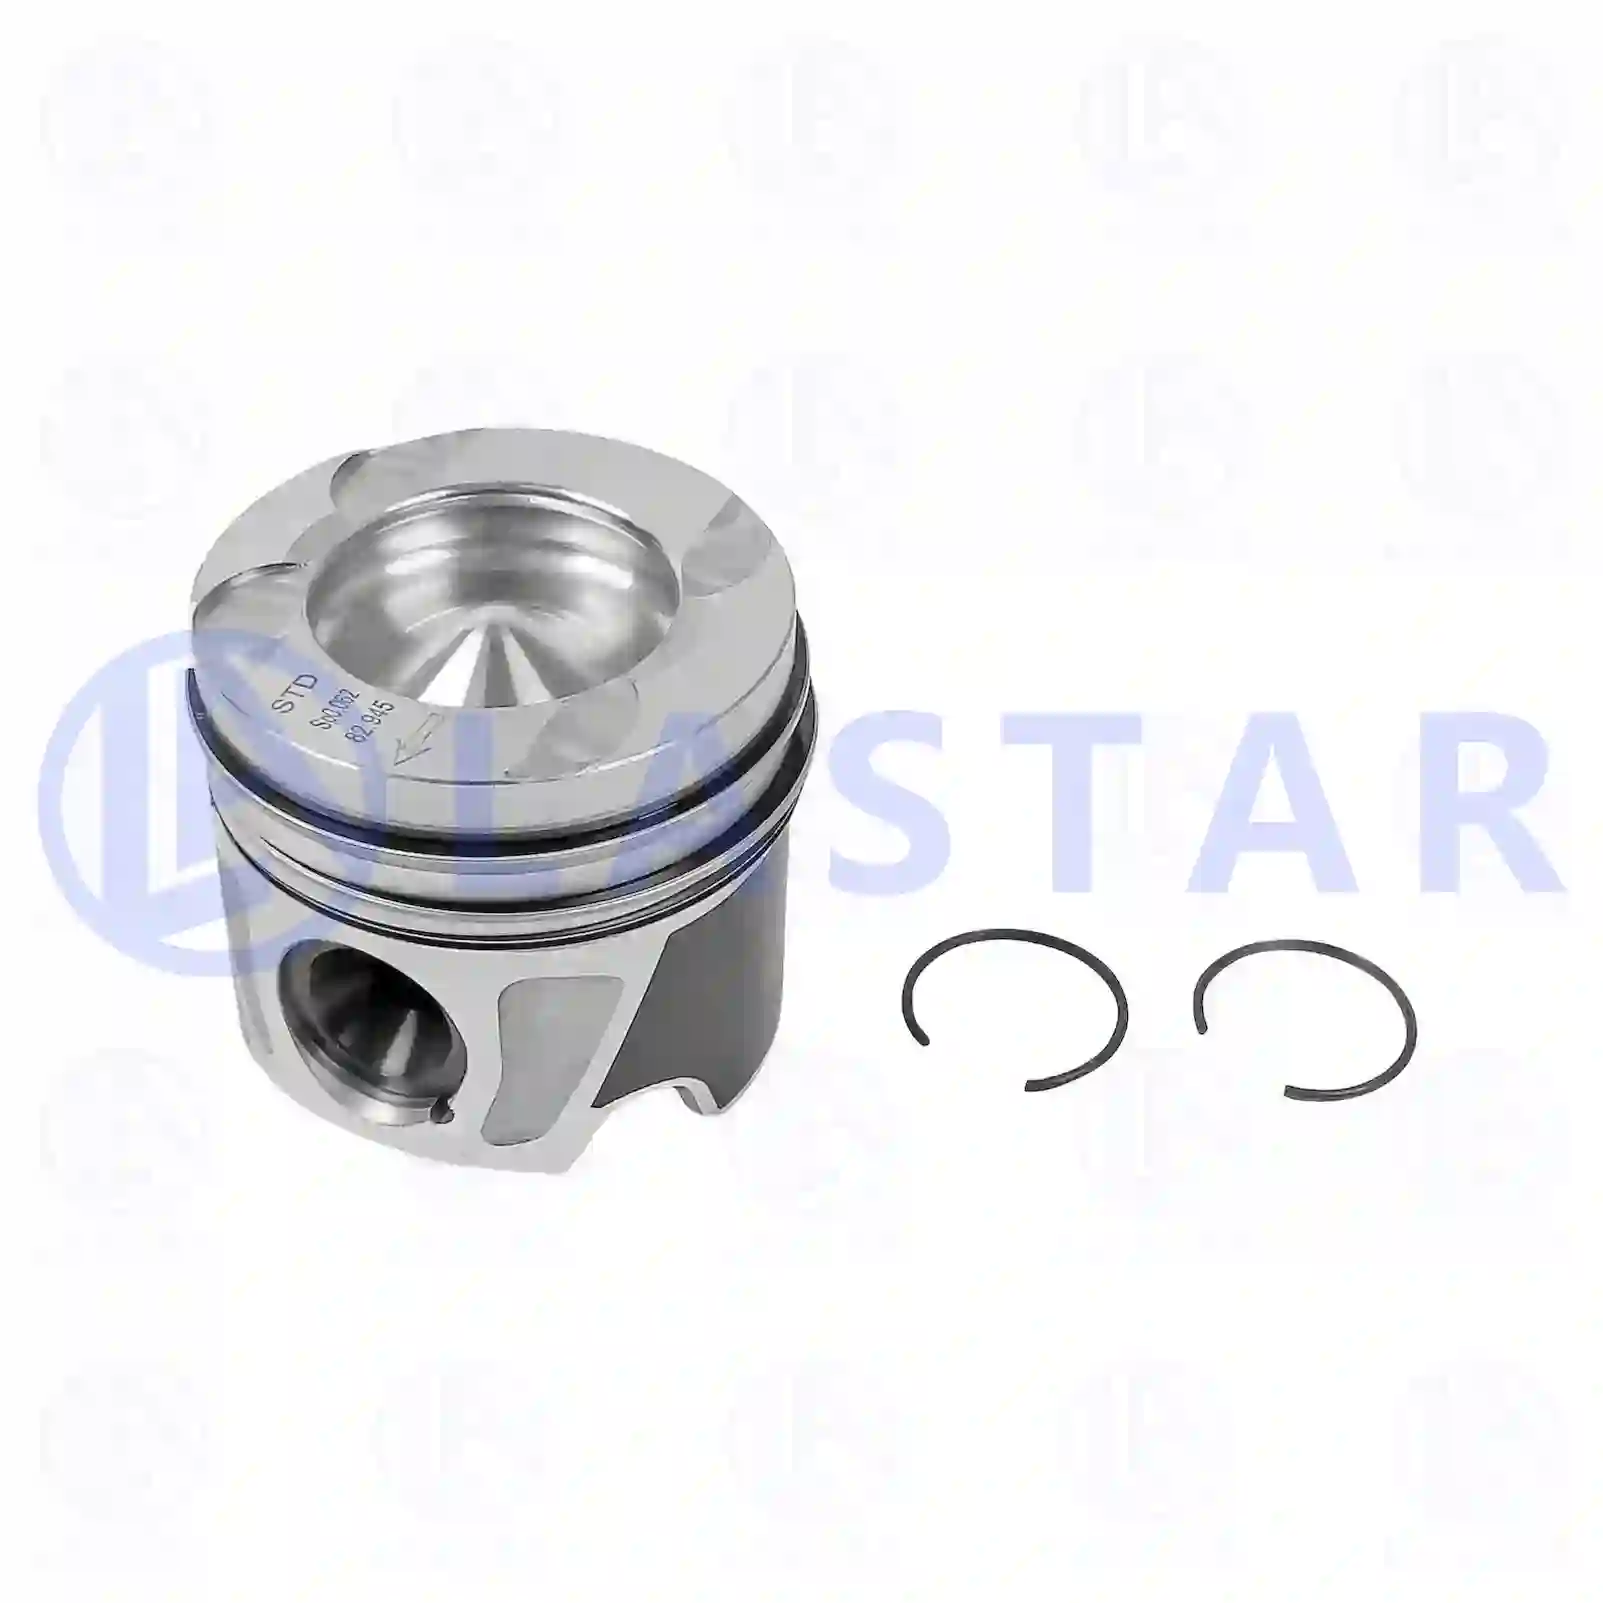 Piston, complete with rings, 77701060, 6510300417, 6510300917, 6510301017, 6510303317 ||  77701060 Lastar Spare Part | Truck Spare Parts, Auotomotive Spare Parts Piston, complete with rings, 77701060, 6510300417, 6510300917, 6510301017, 6510303317 ||  77701060 Lastar Spare Part | Truck Spare Parts, Auotomotive Spare Parts